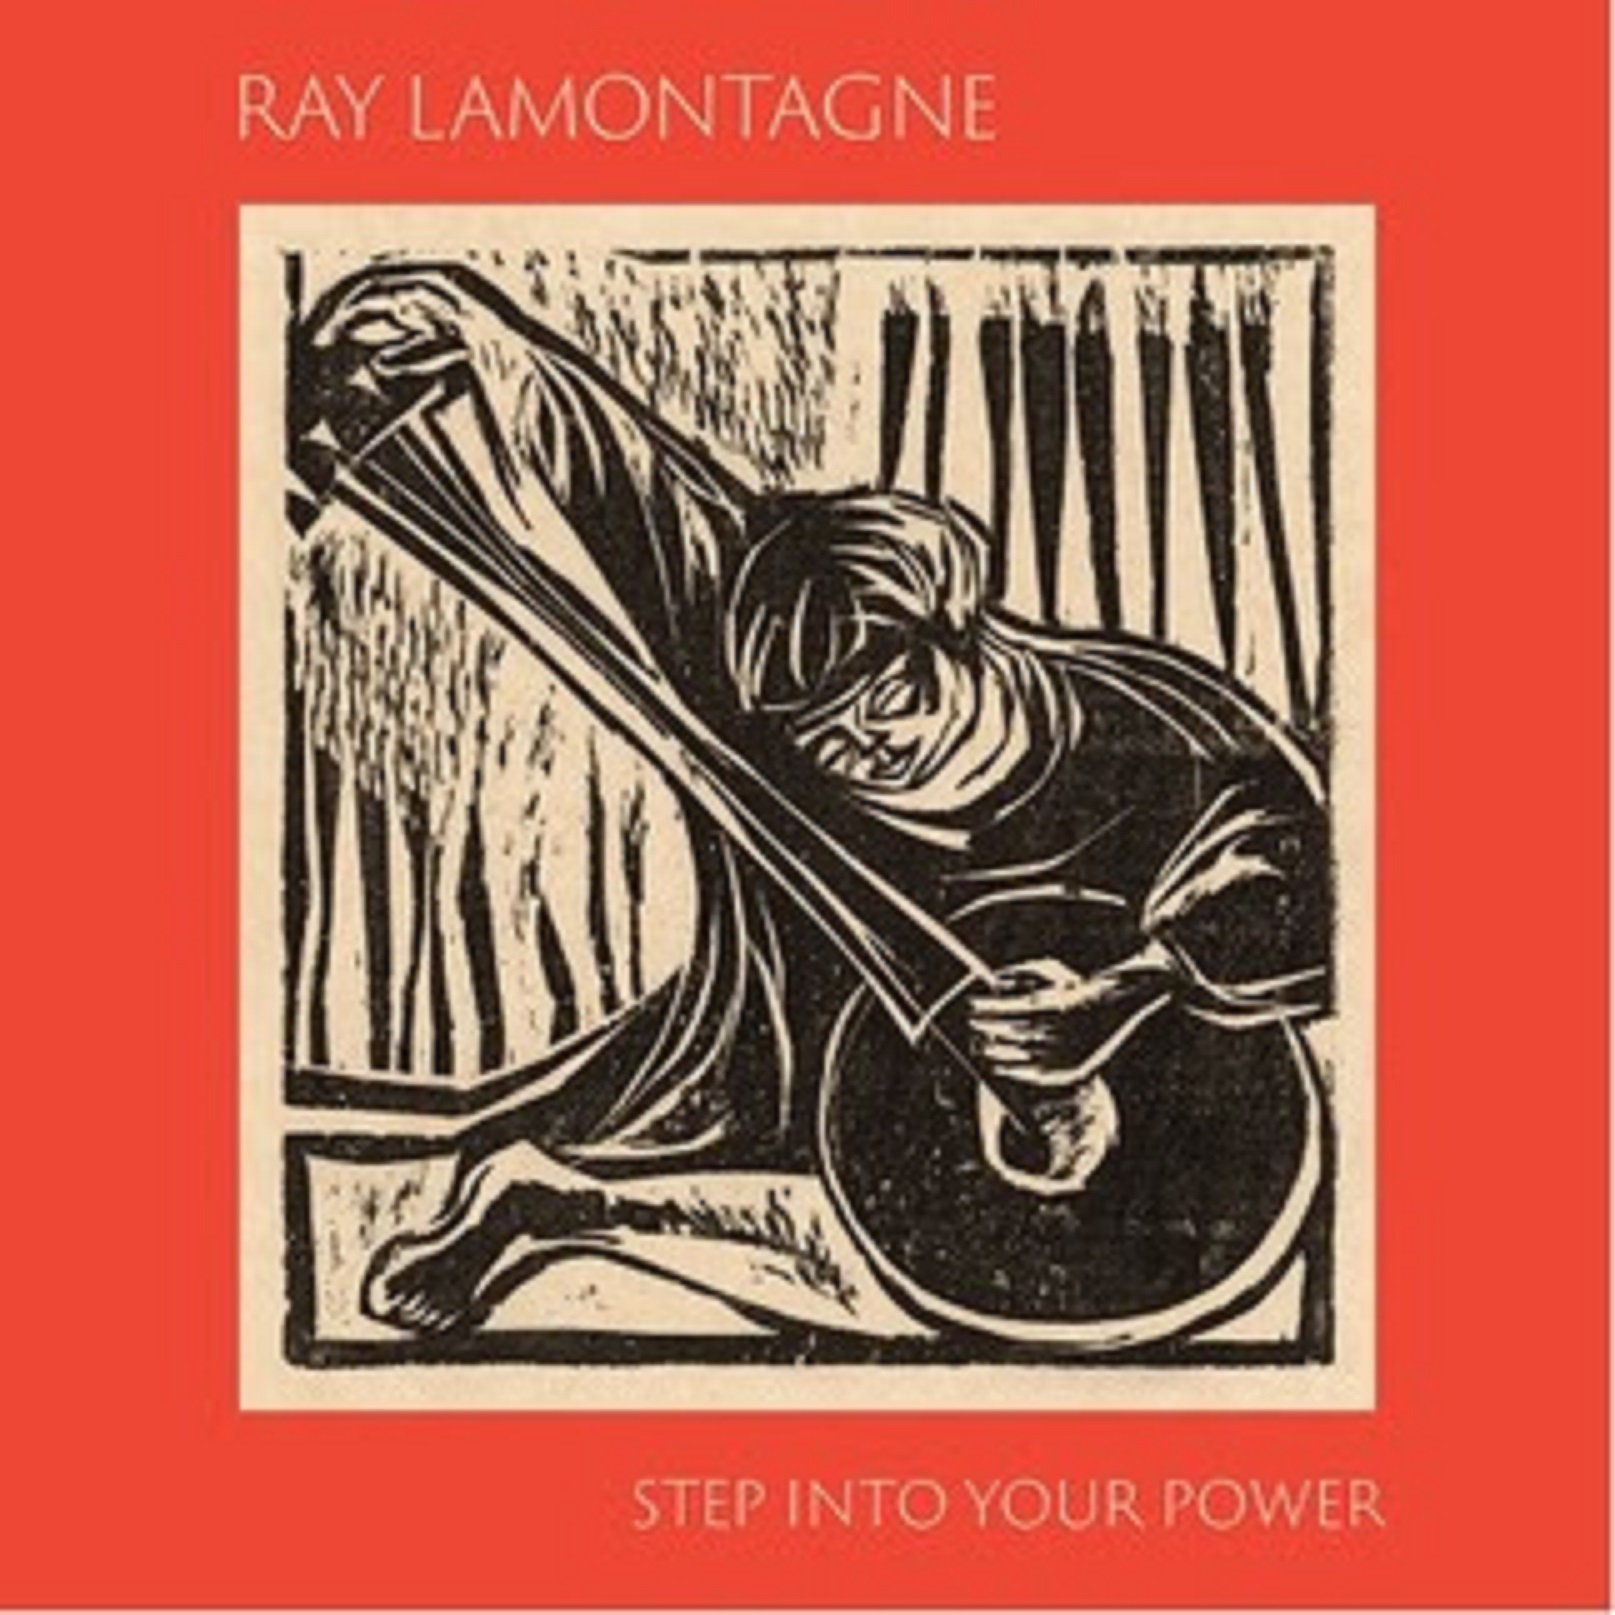 Ray LaMontagne returns with highly anticipated new album Long Way Home out August 16, US headline tour kicks off this Fall